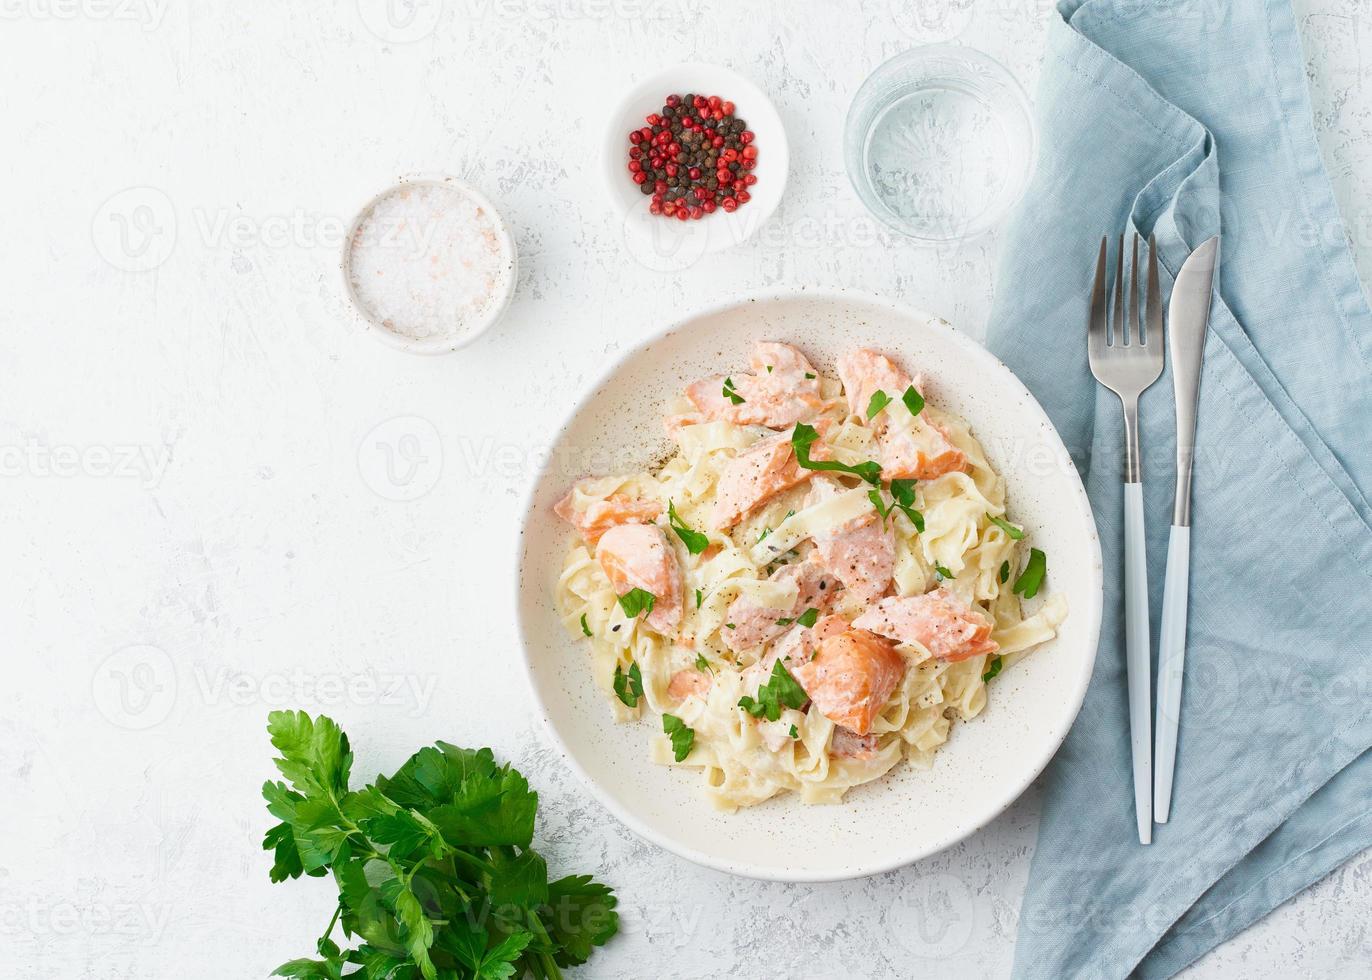 Salmon pasta, tagliatelle with fish and creamy sauce. Italian dinner with seafood photo